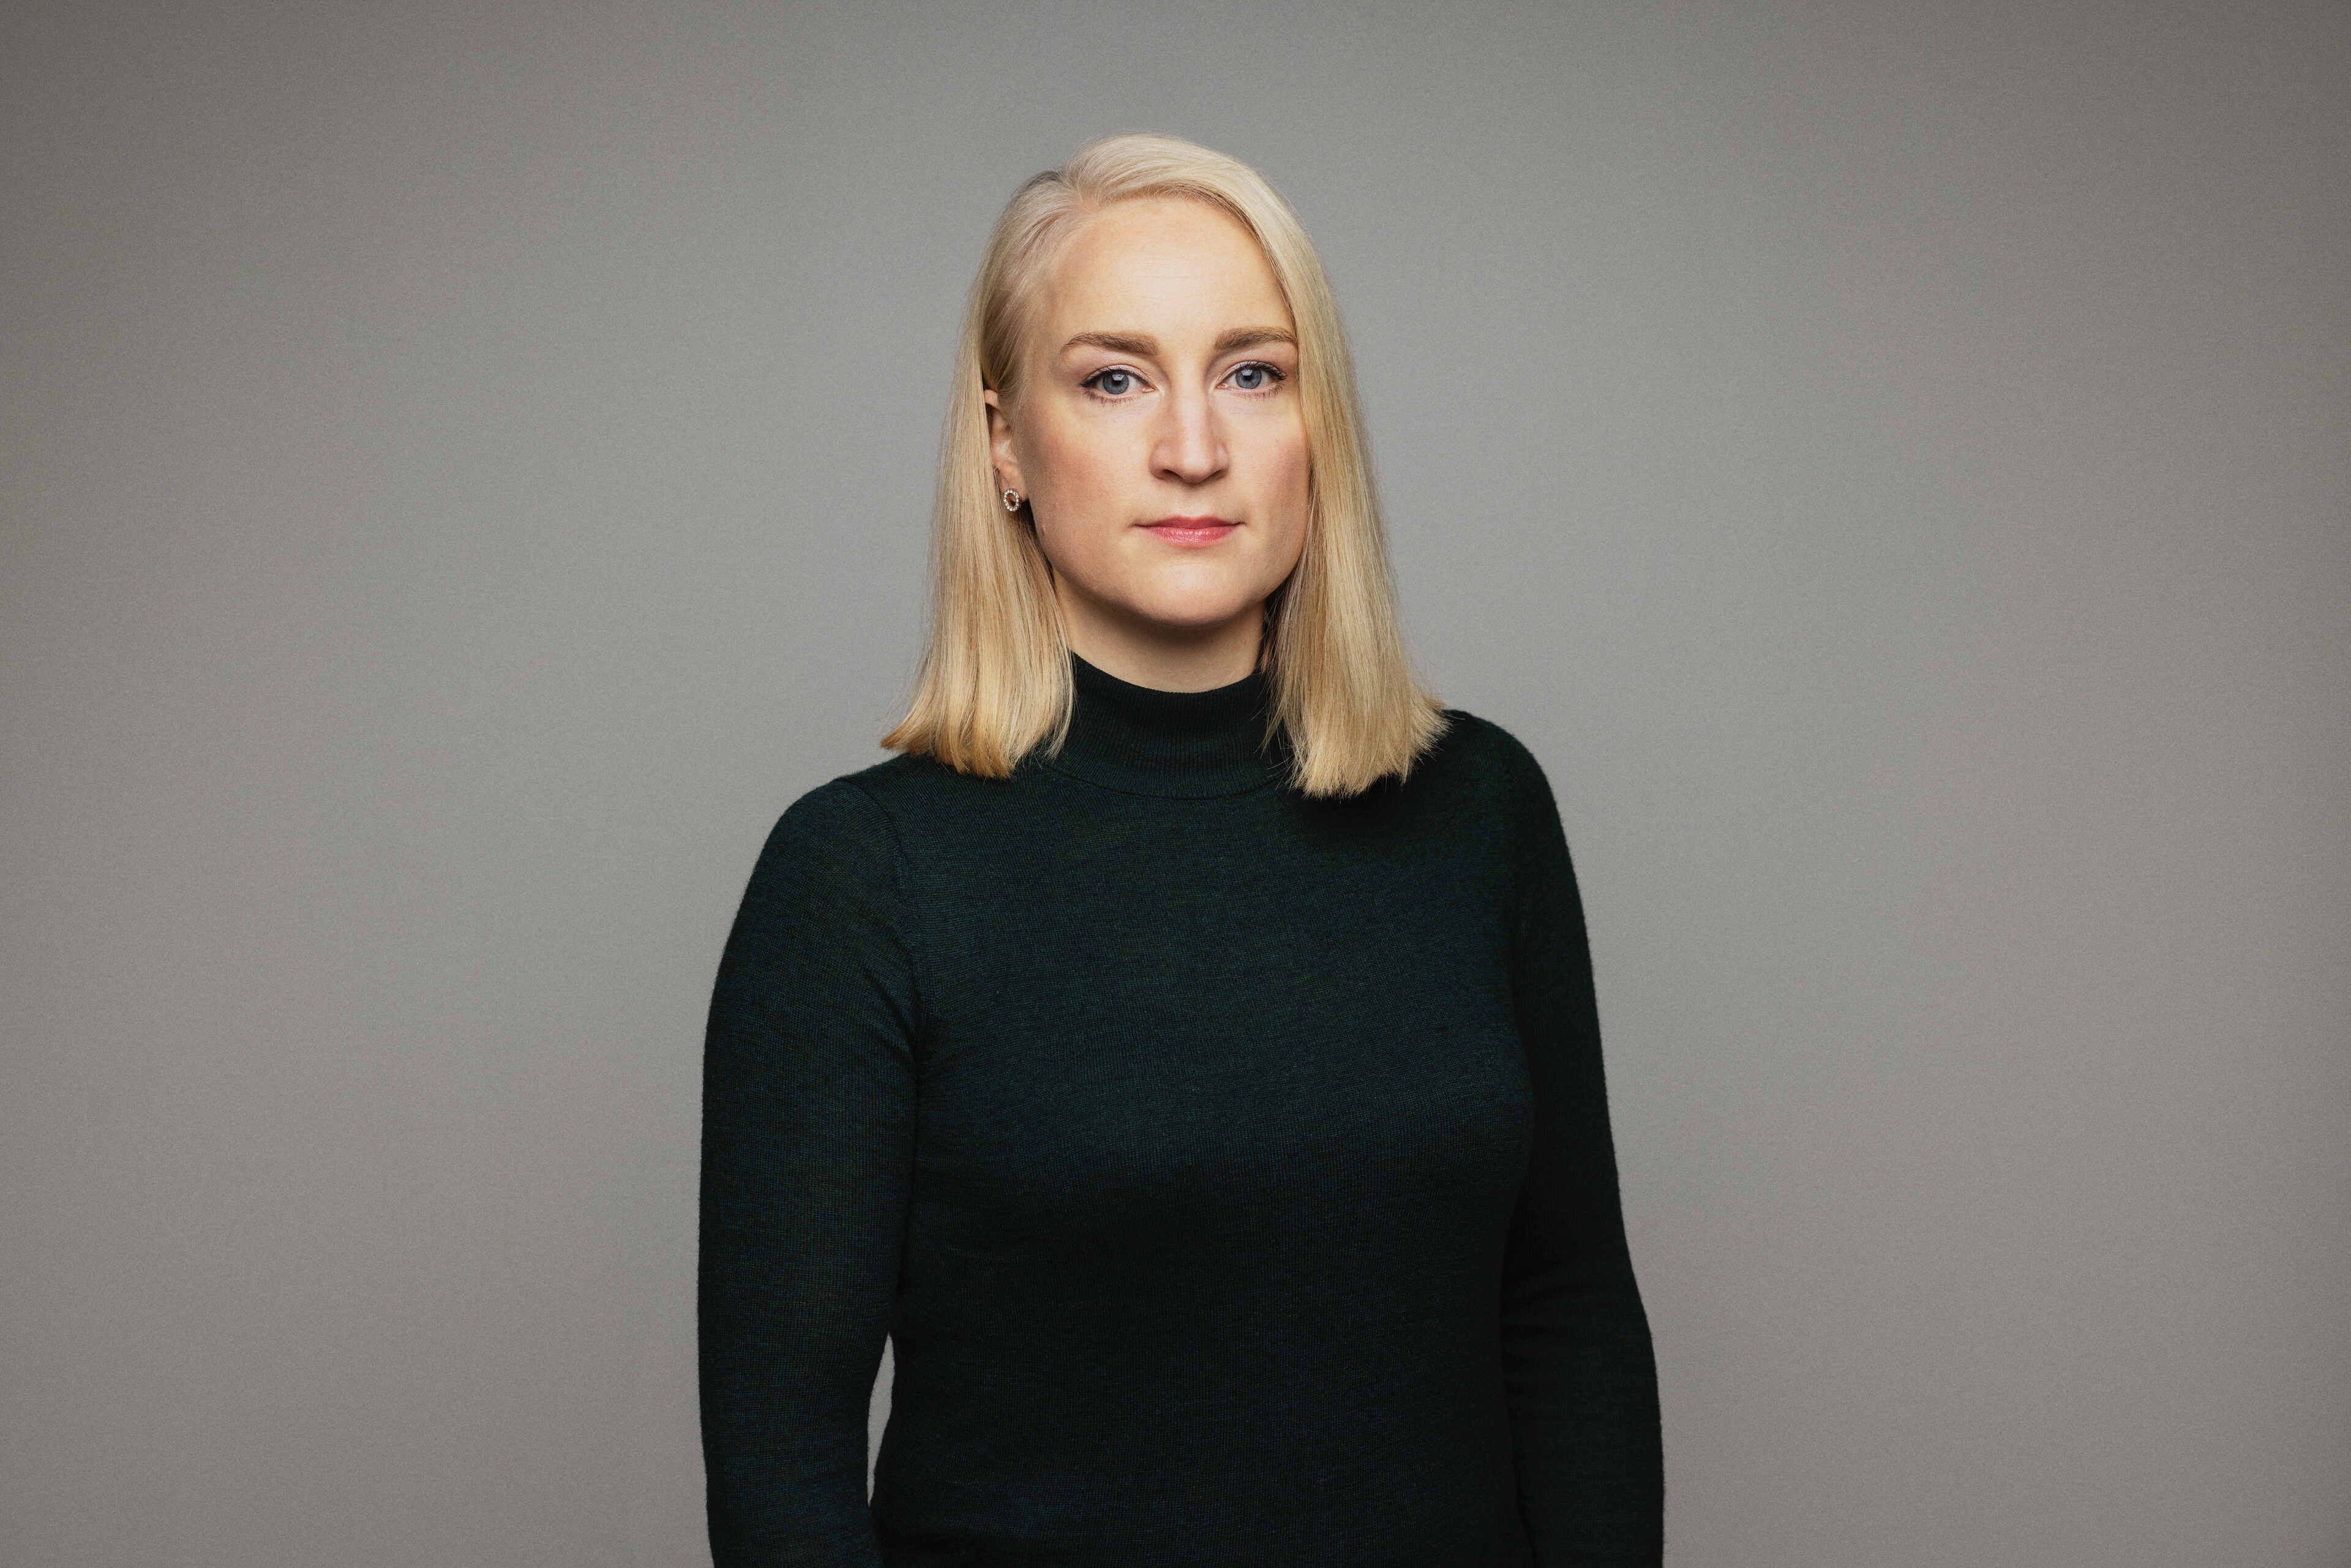 A blonde woman with straight hair open in a black polo shirt